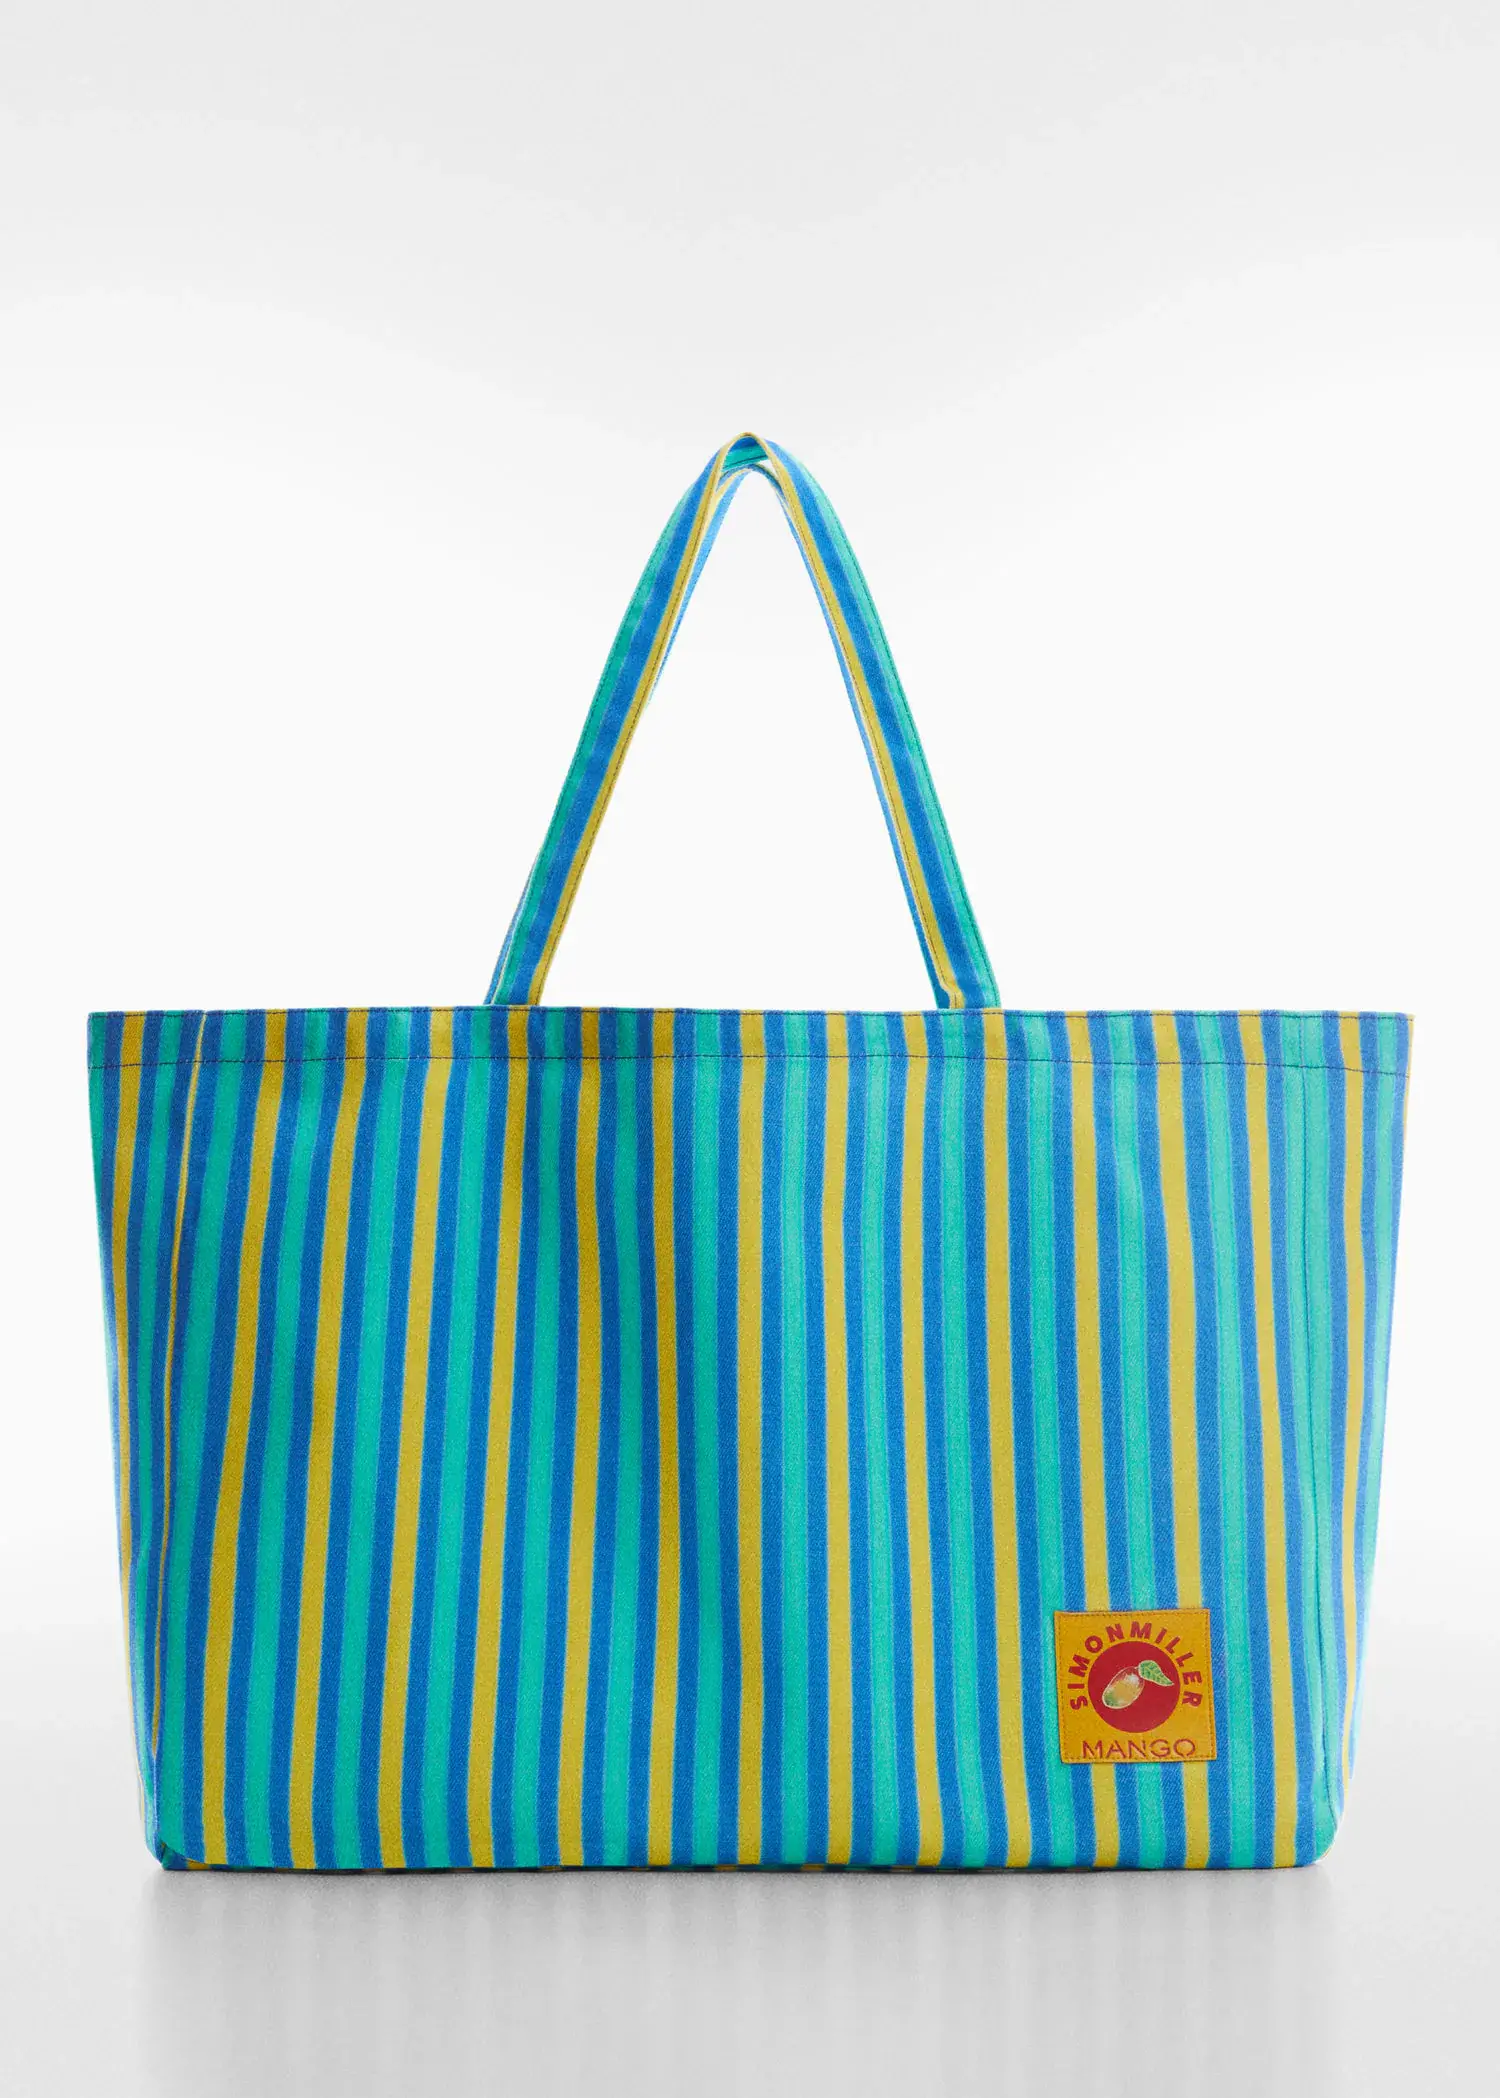 Mango Multi-colored striped maxi bag. a blue and yellow striped tote bag with a lion patch on it. 